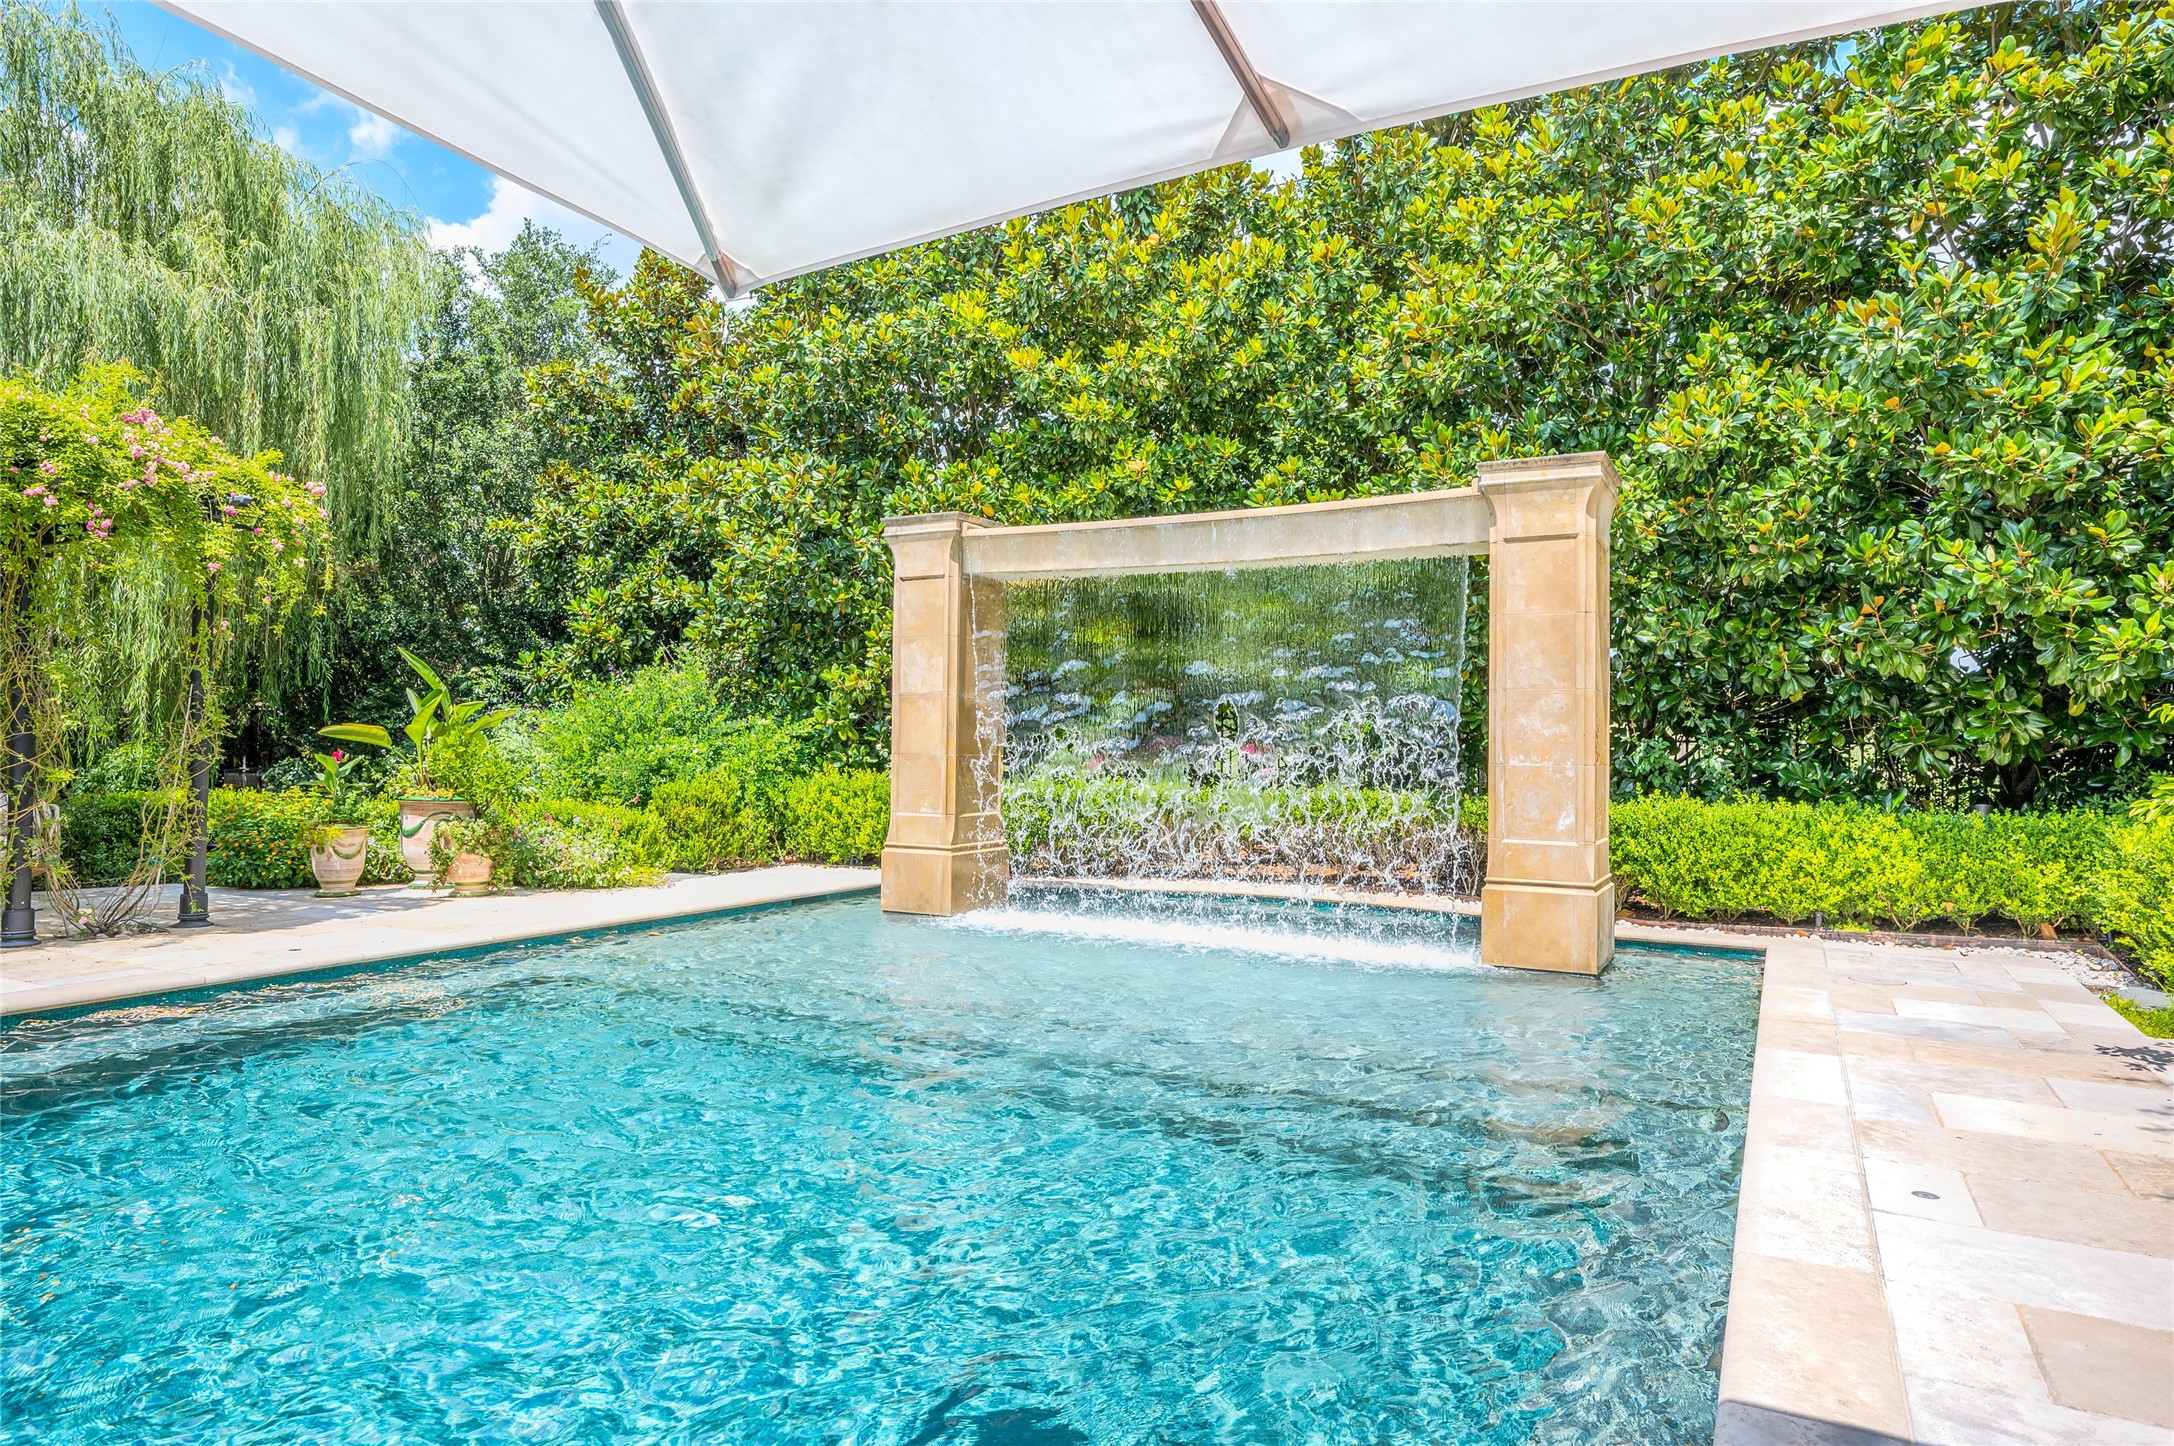 A calming water wall, along the lush canopy of towering trees, adds to the carefully curated ambiance within the pool and outdoor dining area.